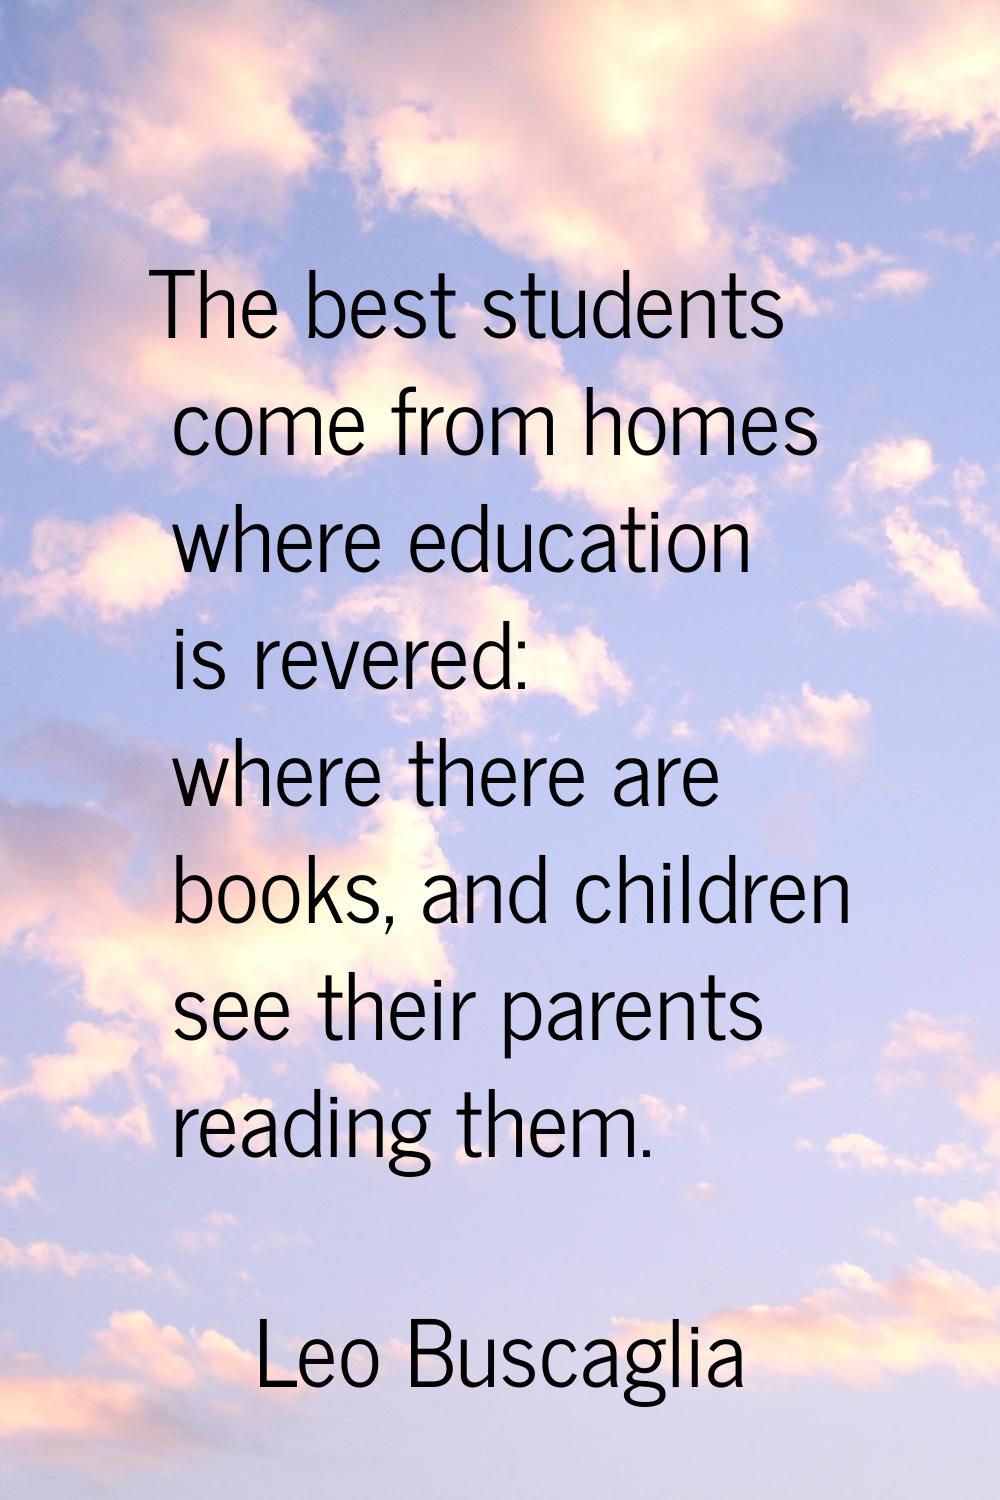 The best students come from homes where education is revered: where there are books, and children s